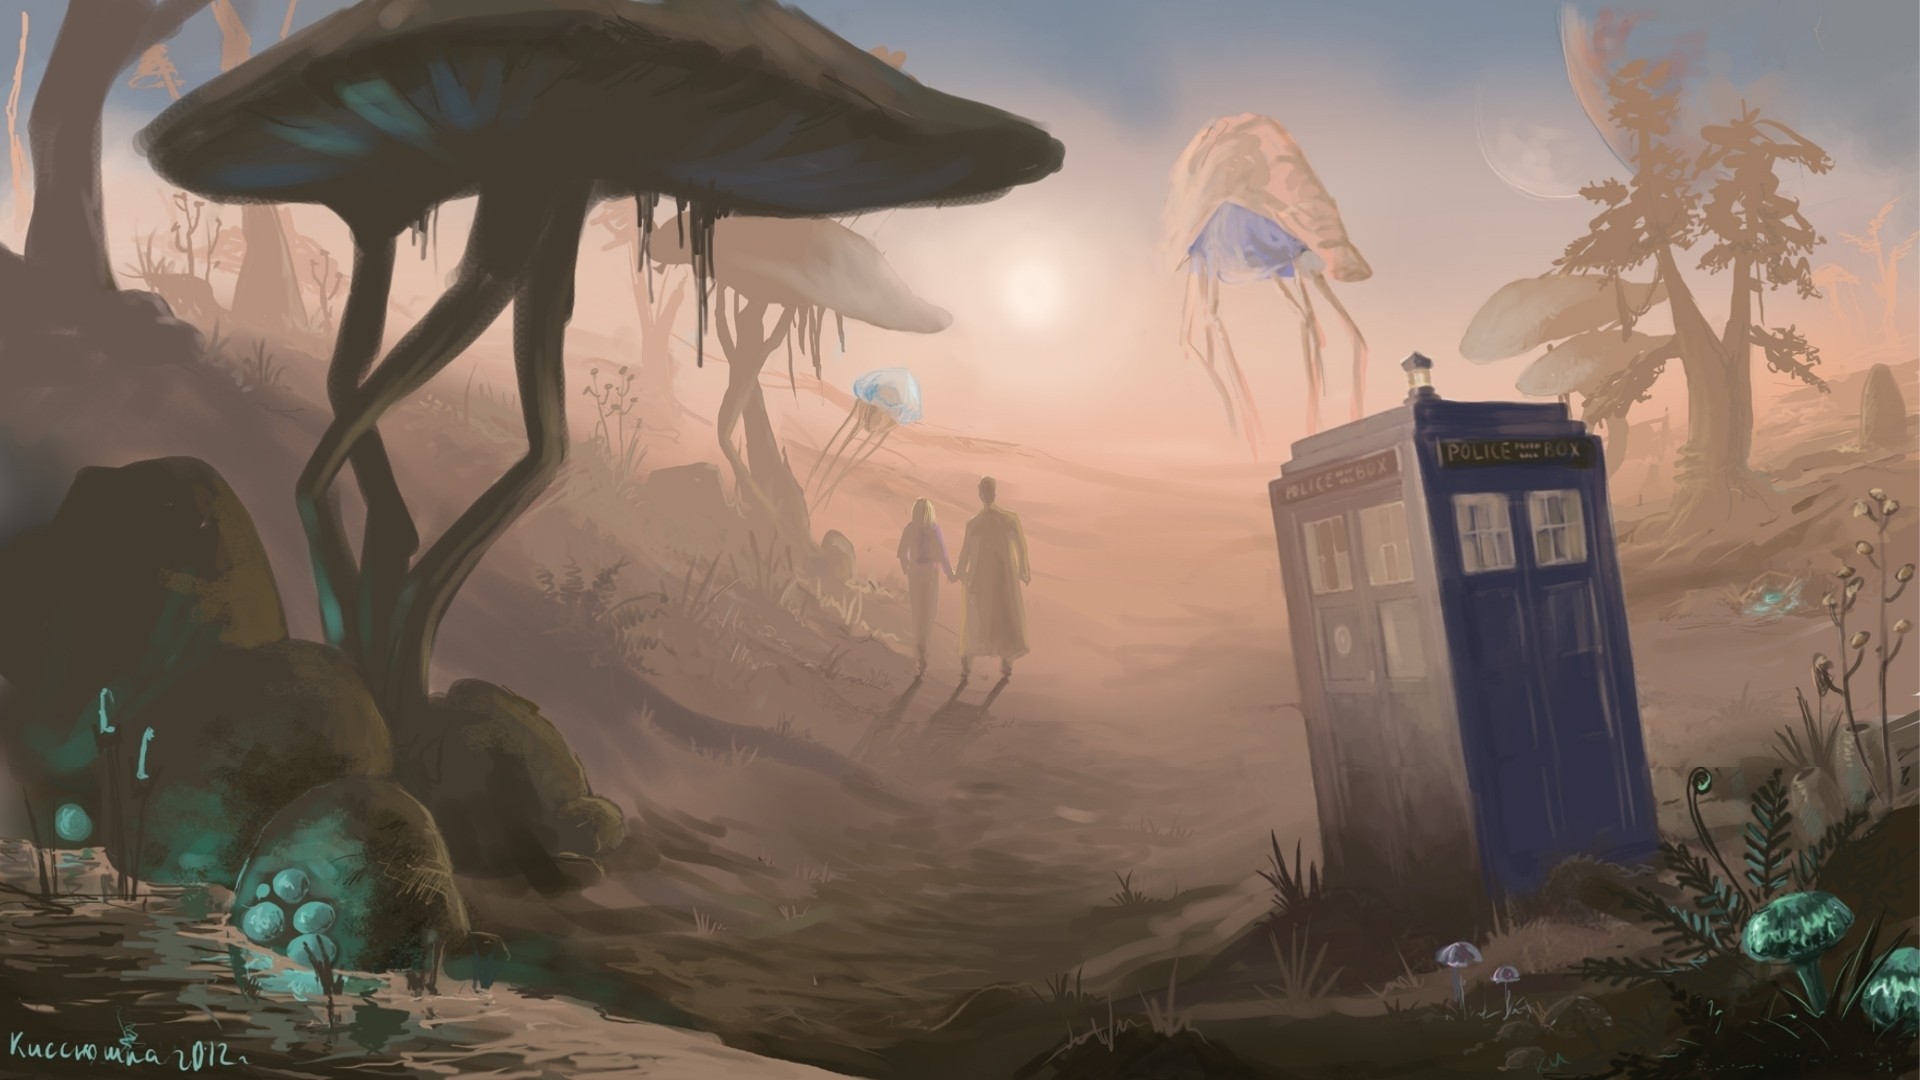 General 1920x1080 TARDIS anime Doctor Who The Elder Scrolls III: Morrowind TV series crossover science fiction PC gaming